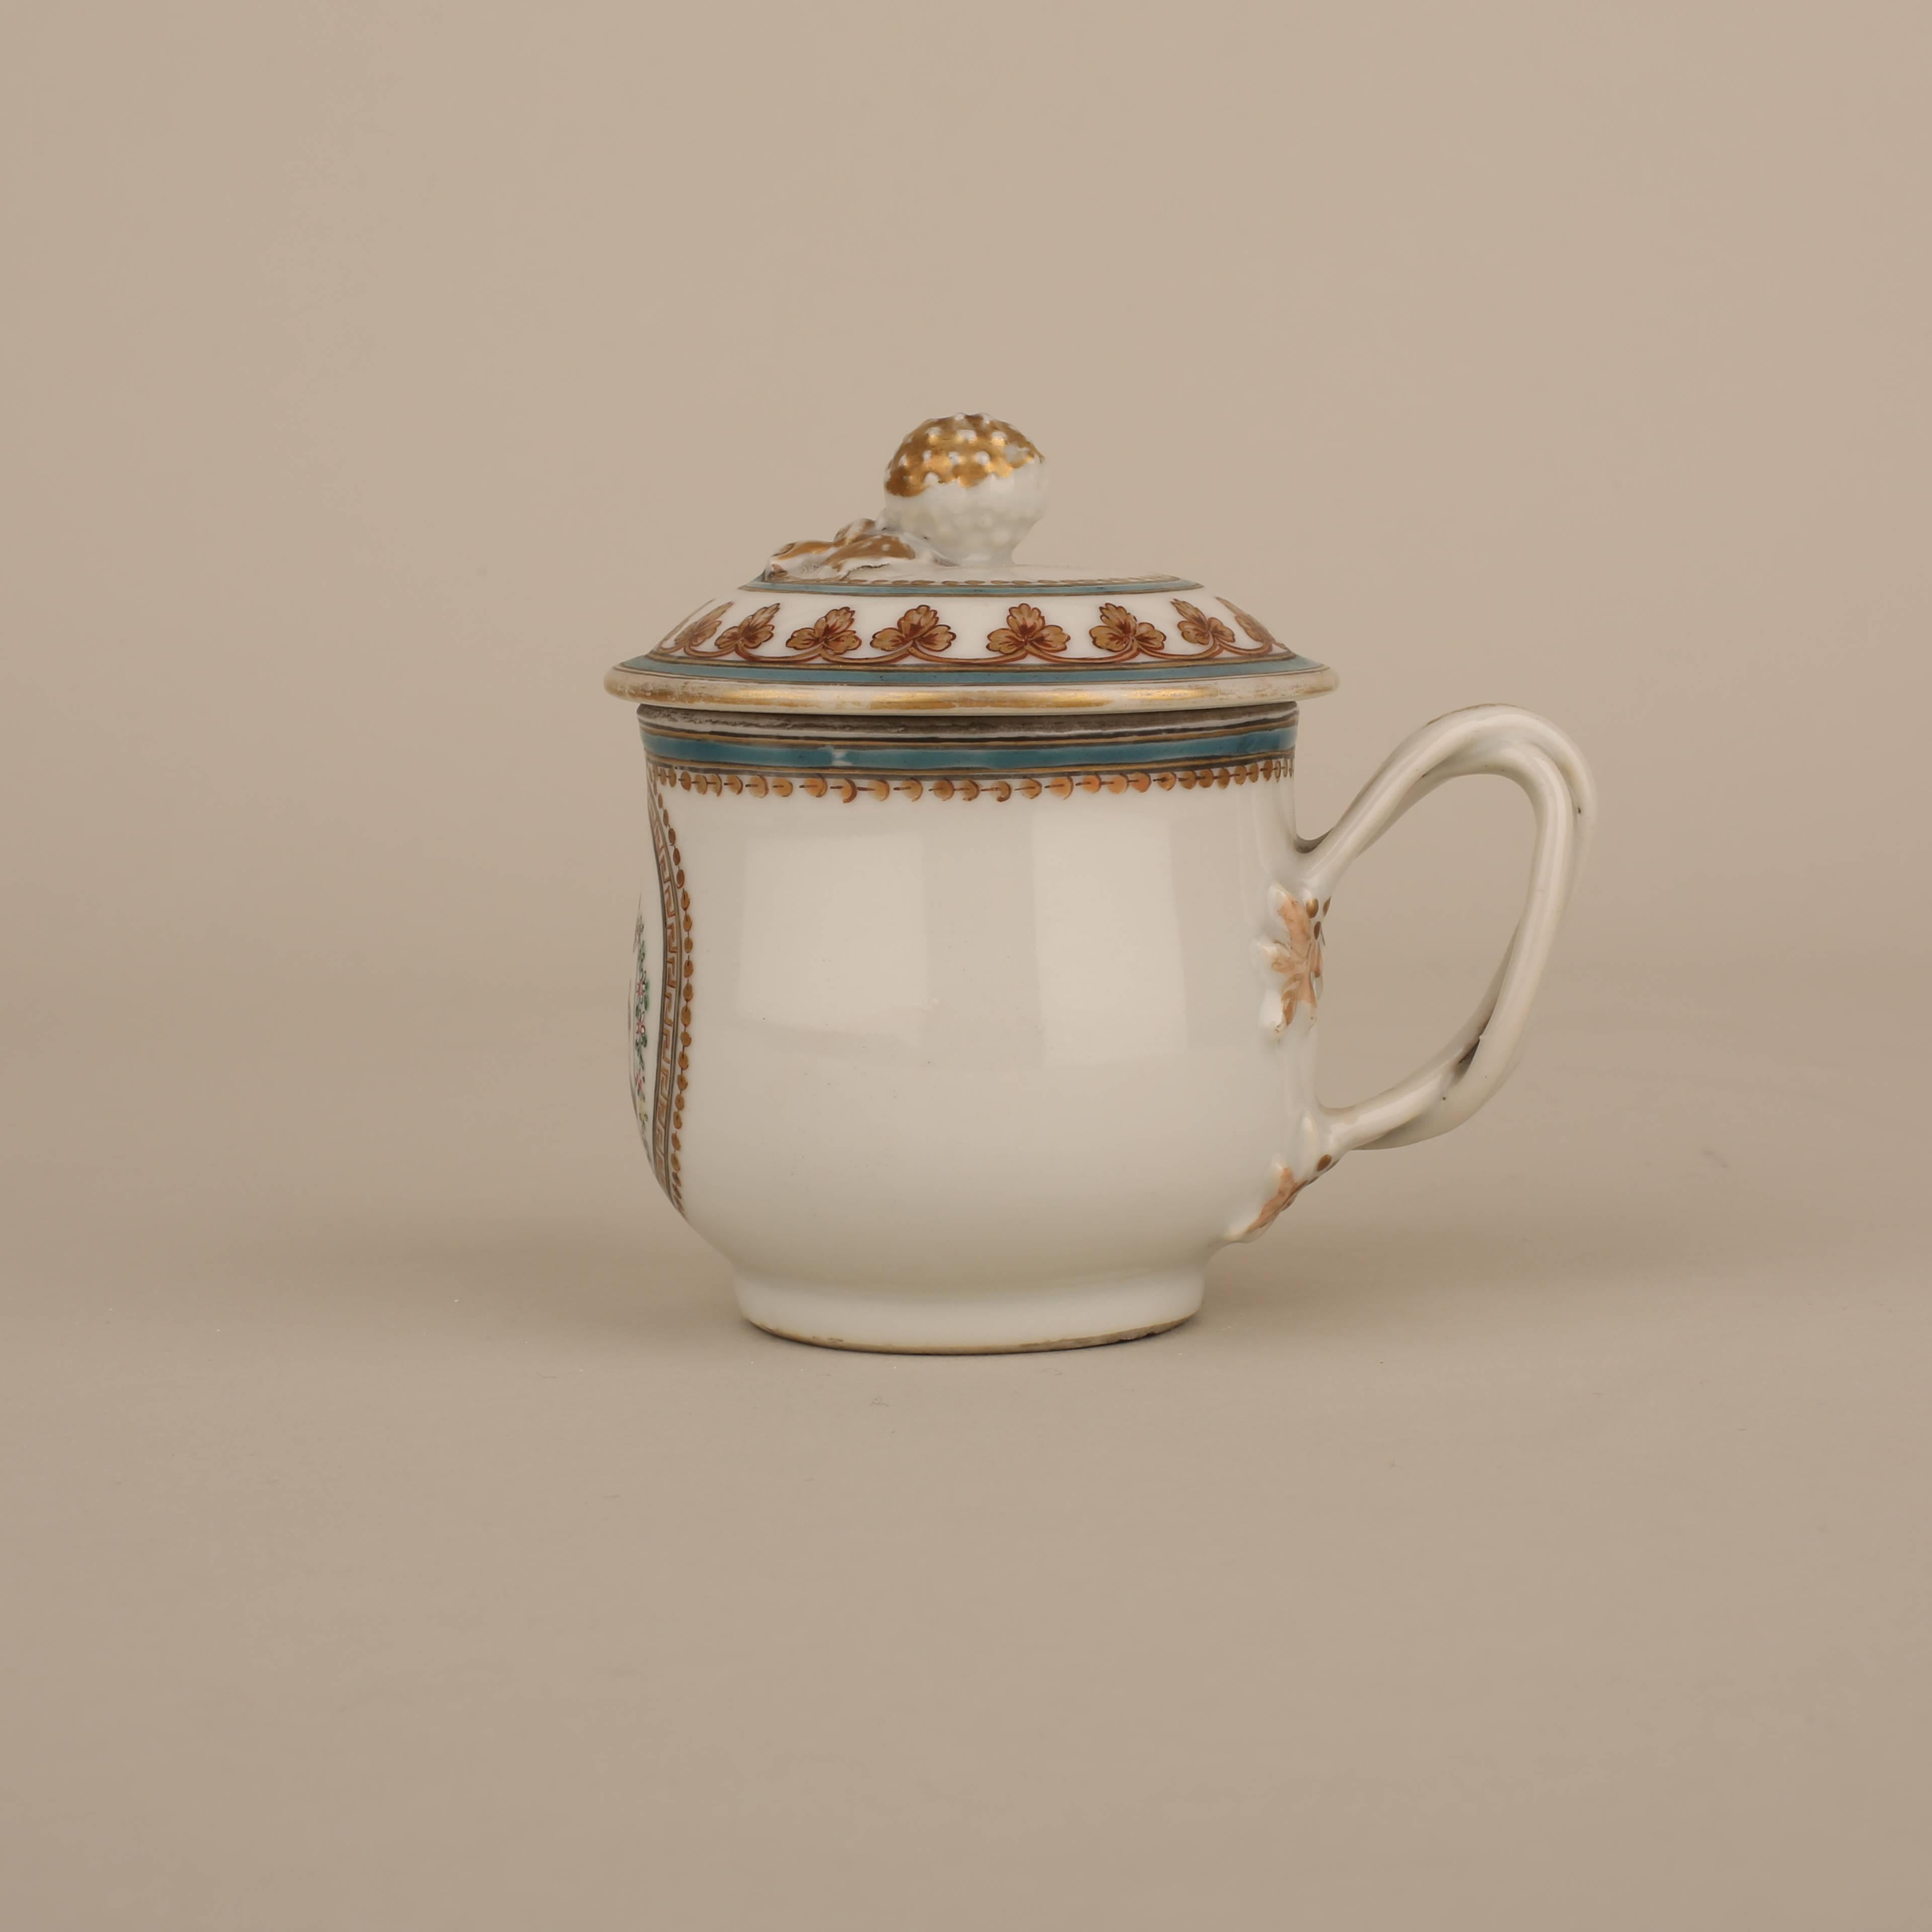 A Chinese porcelain slightly bulbous form Armorial cup and cover painted with a medallion containing a coat of Arms opposite the handle, the handle as two twisted branches beginning and ending in leaves, the rim with a gold and blue continuous band,